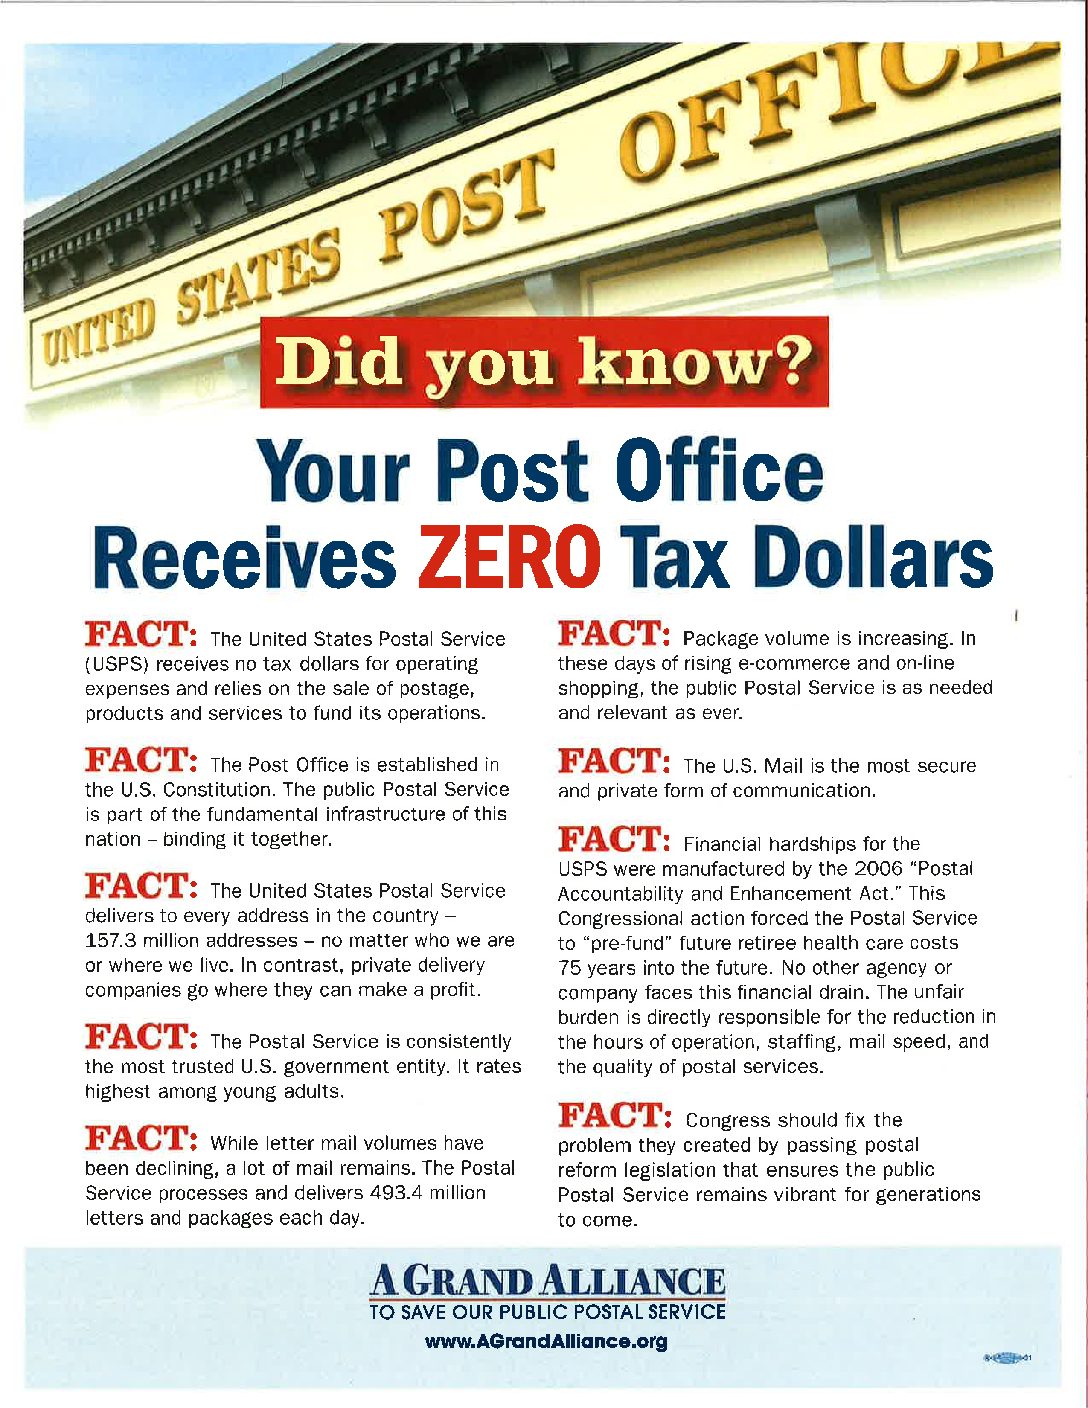 Your Post Office Receives ZERO Tax Dollars